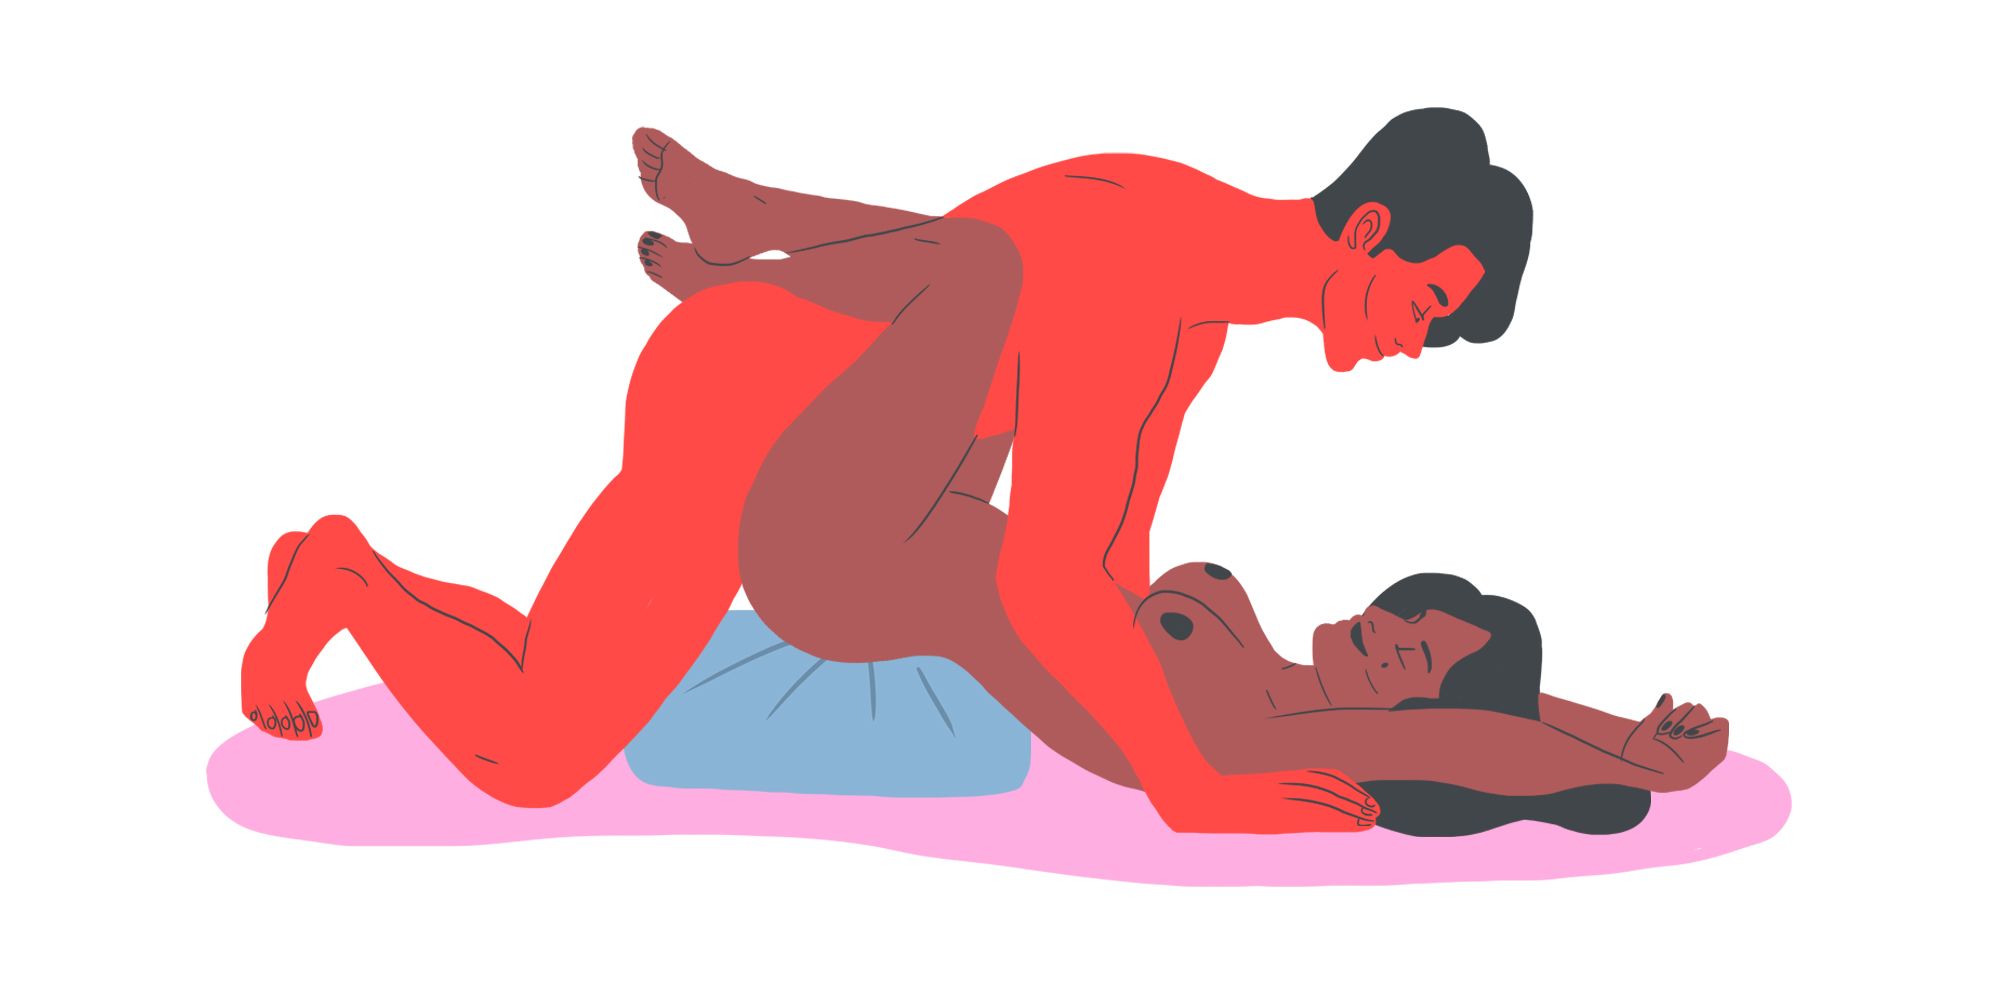 Dick sex positions